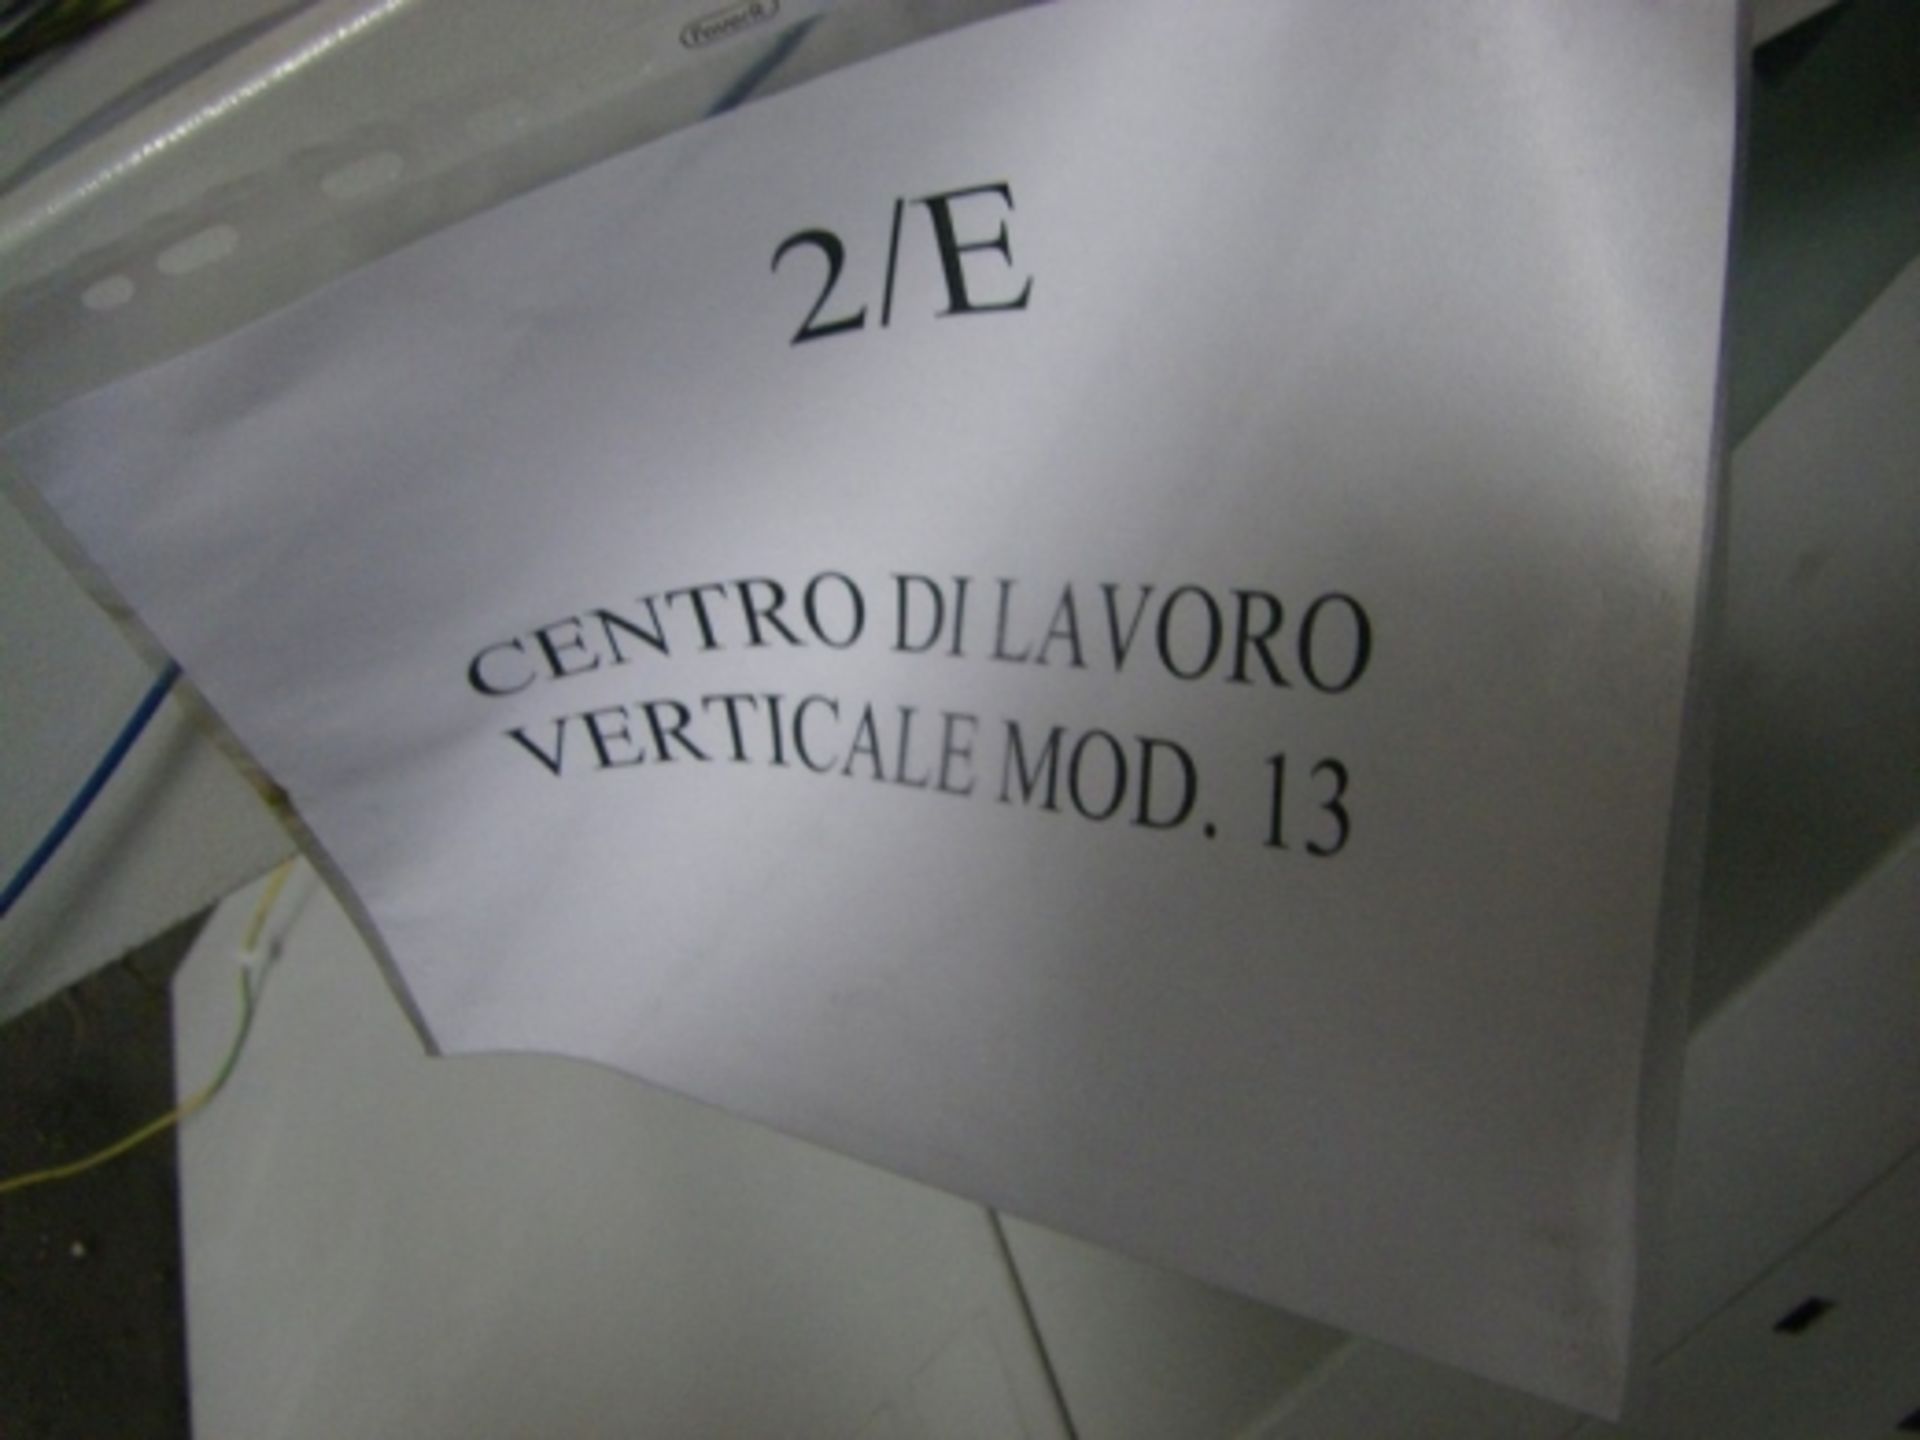 1,Vertical machining center Mod. 13 Click here for more details - Image 2 of 4